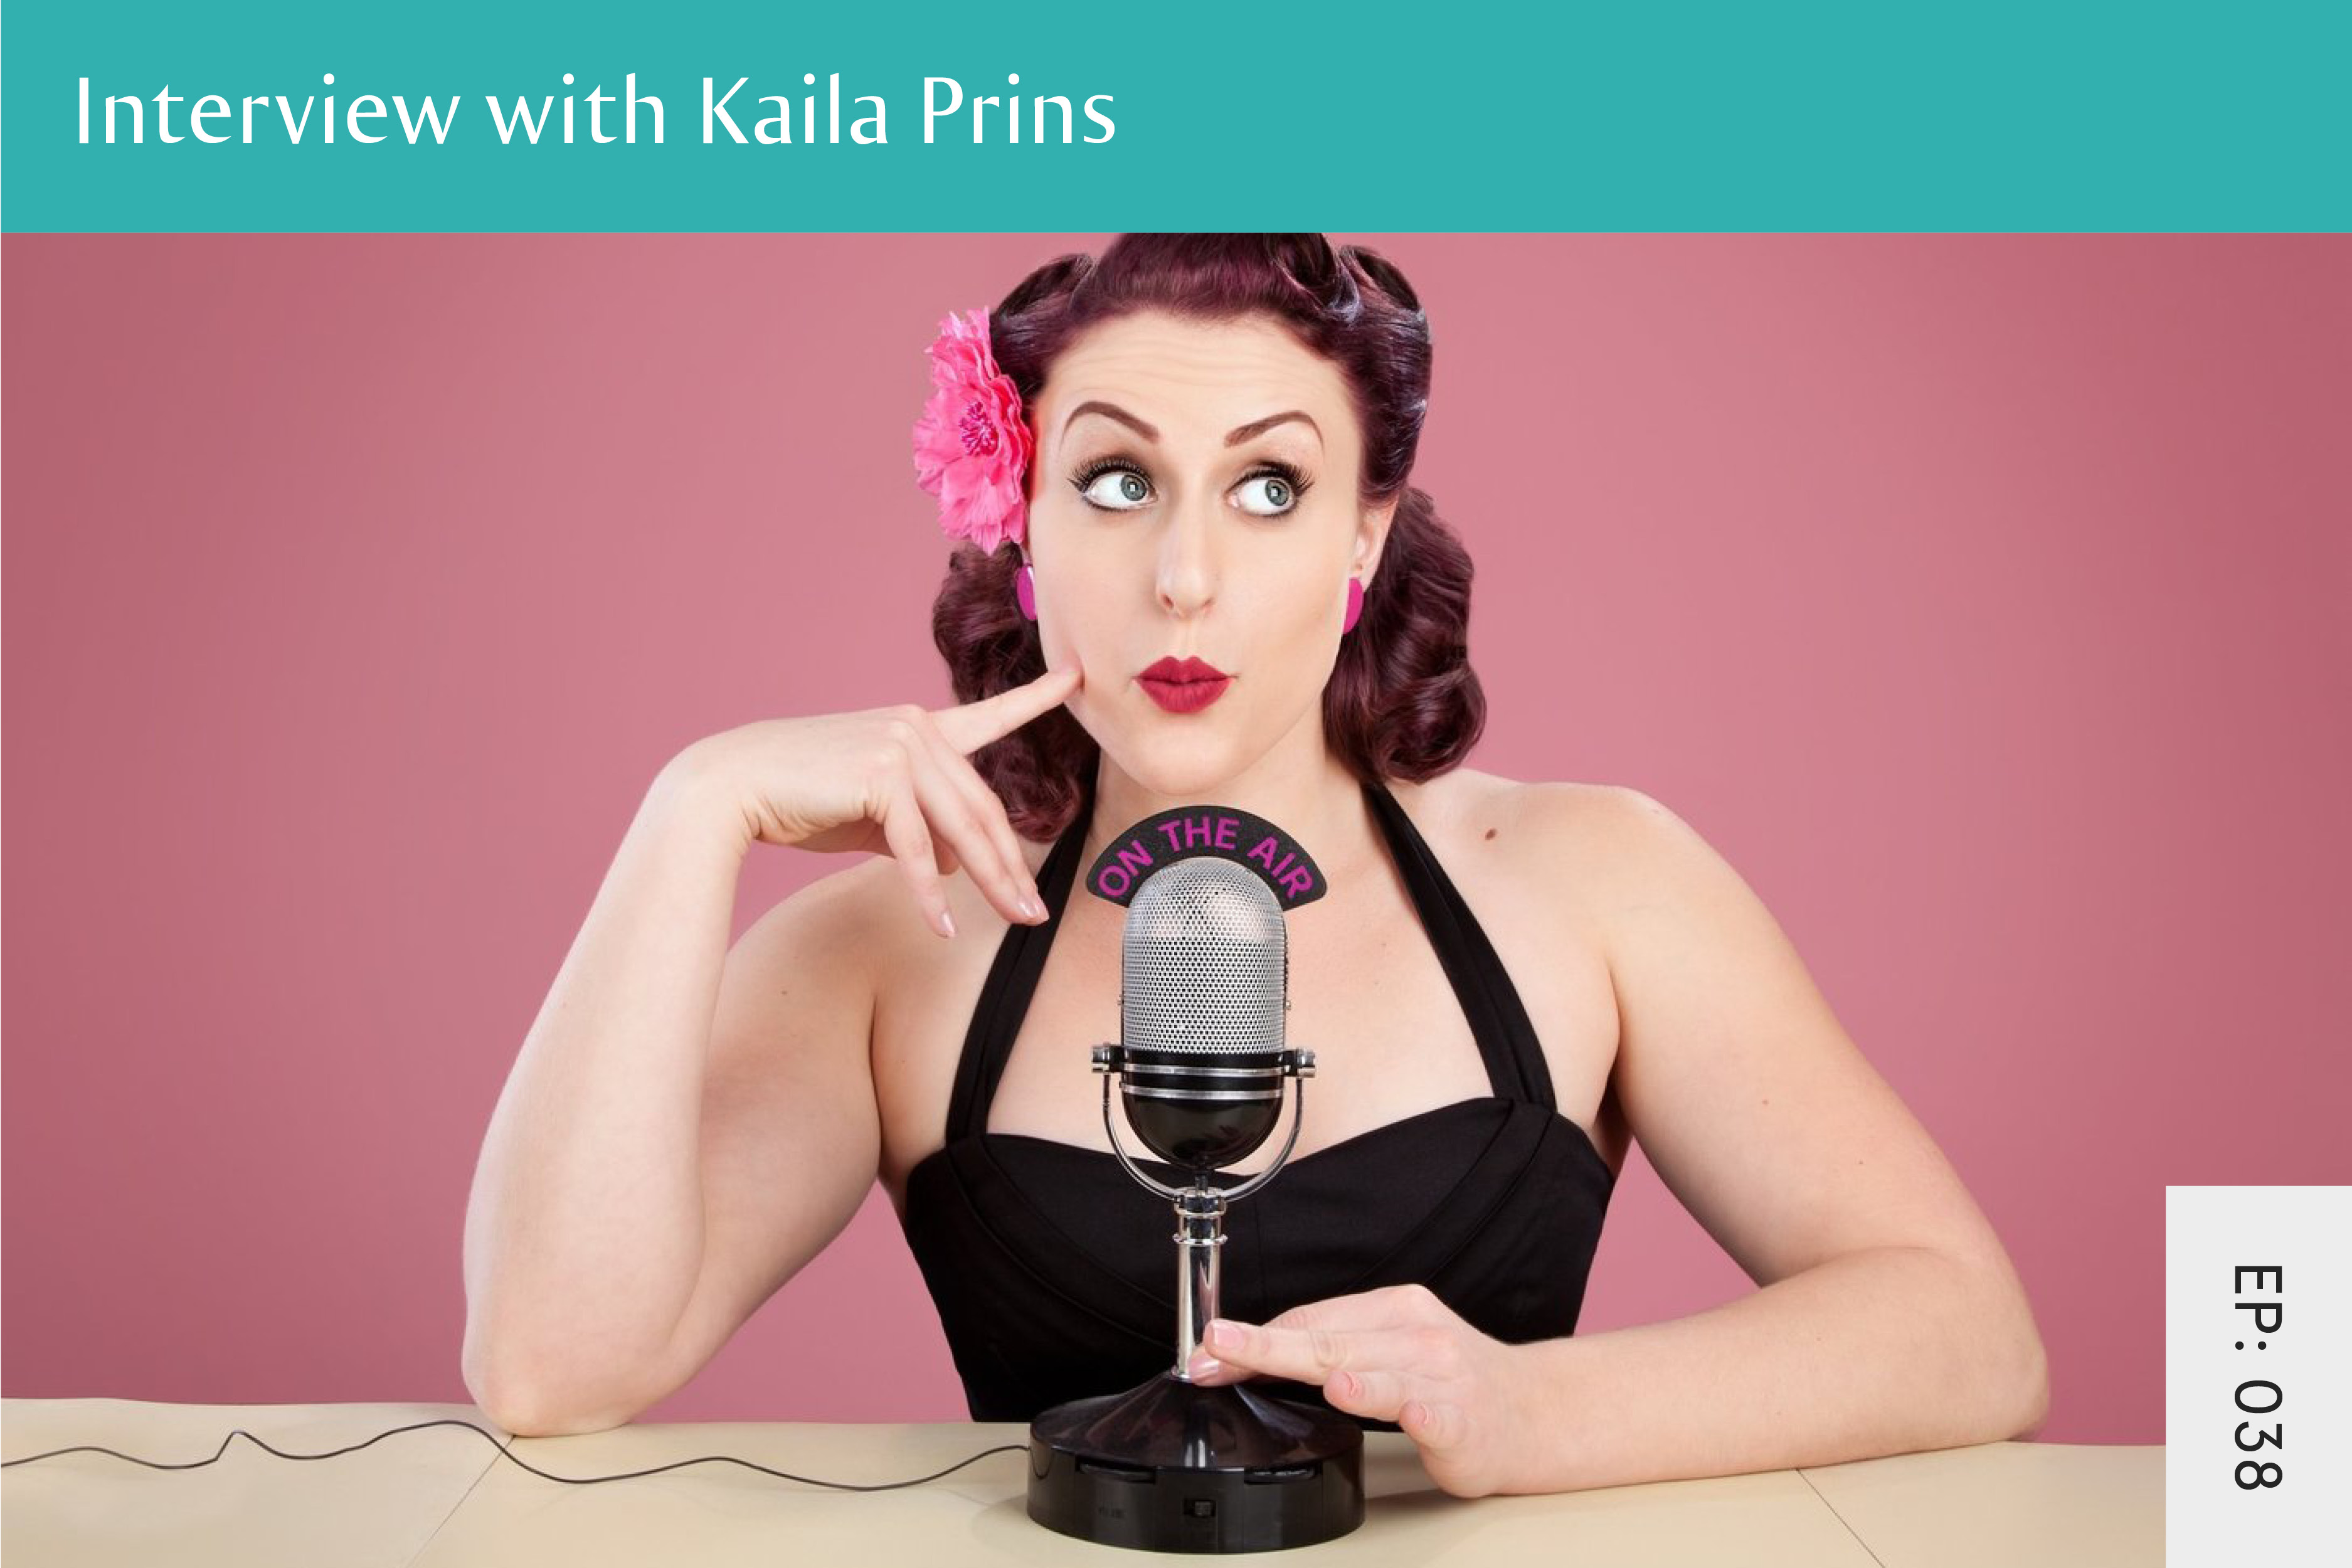 038: Interview with Kaila Prins - Seven Health: Eating Disorder Recovery and Anti Diet Nutritionist